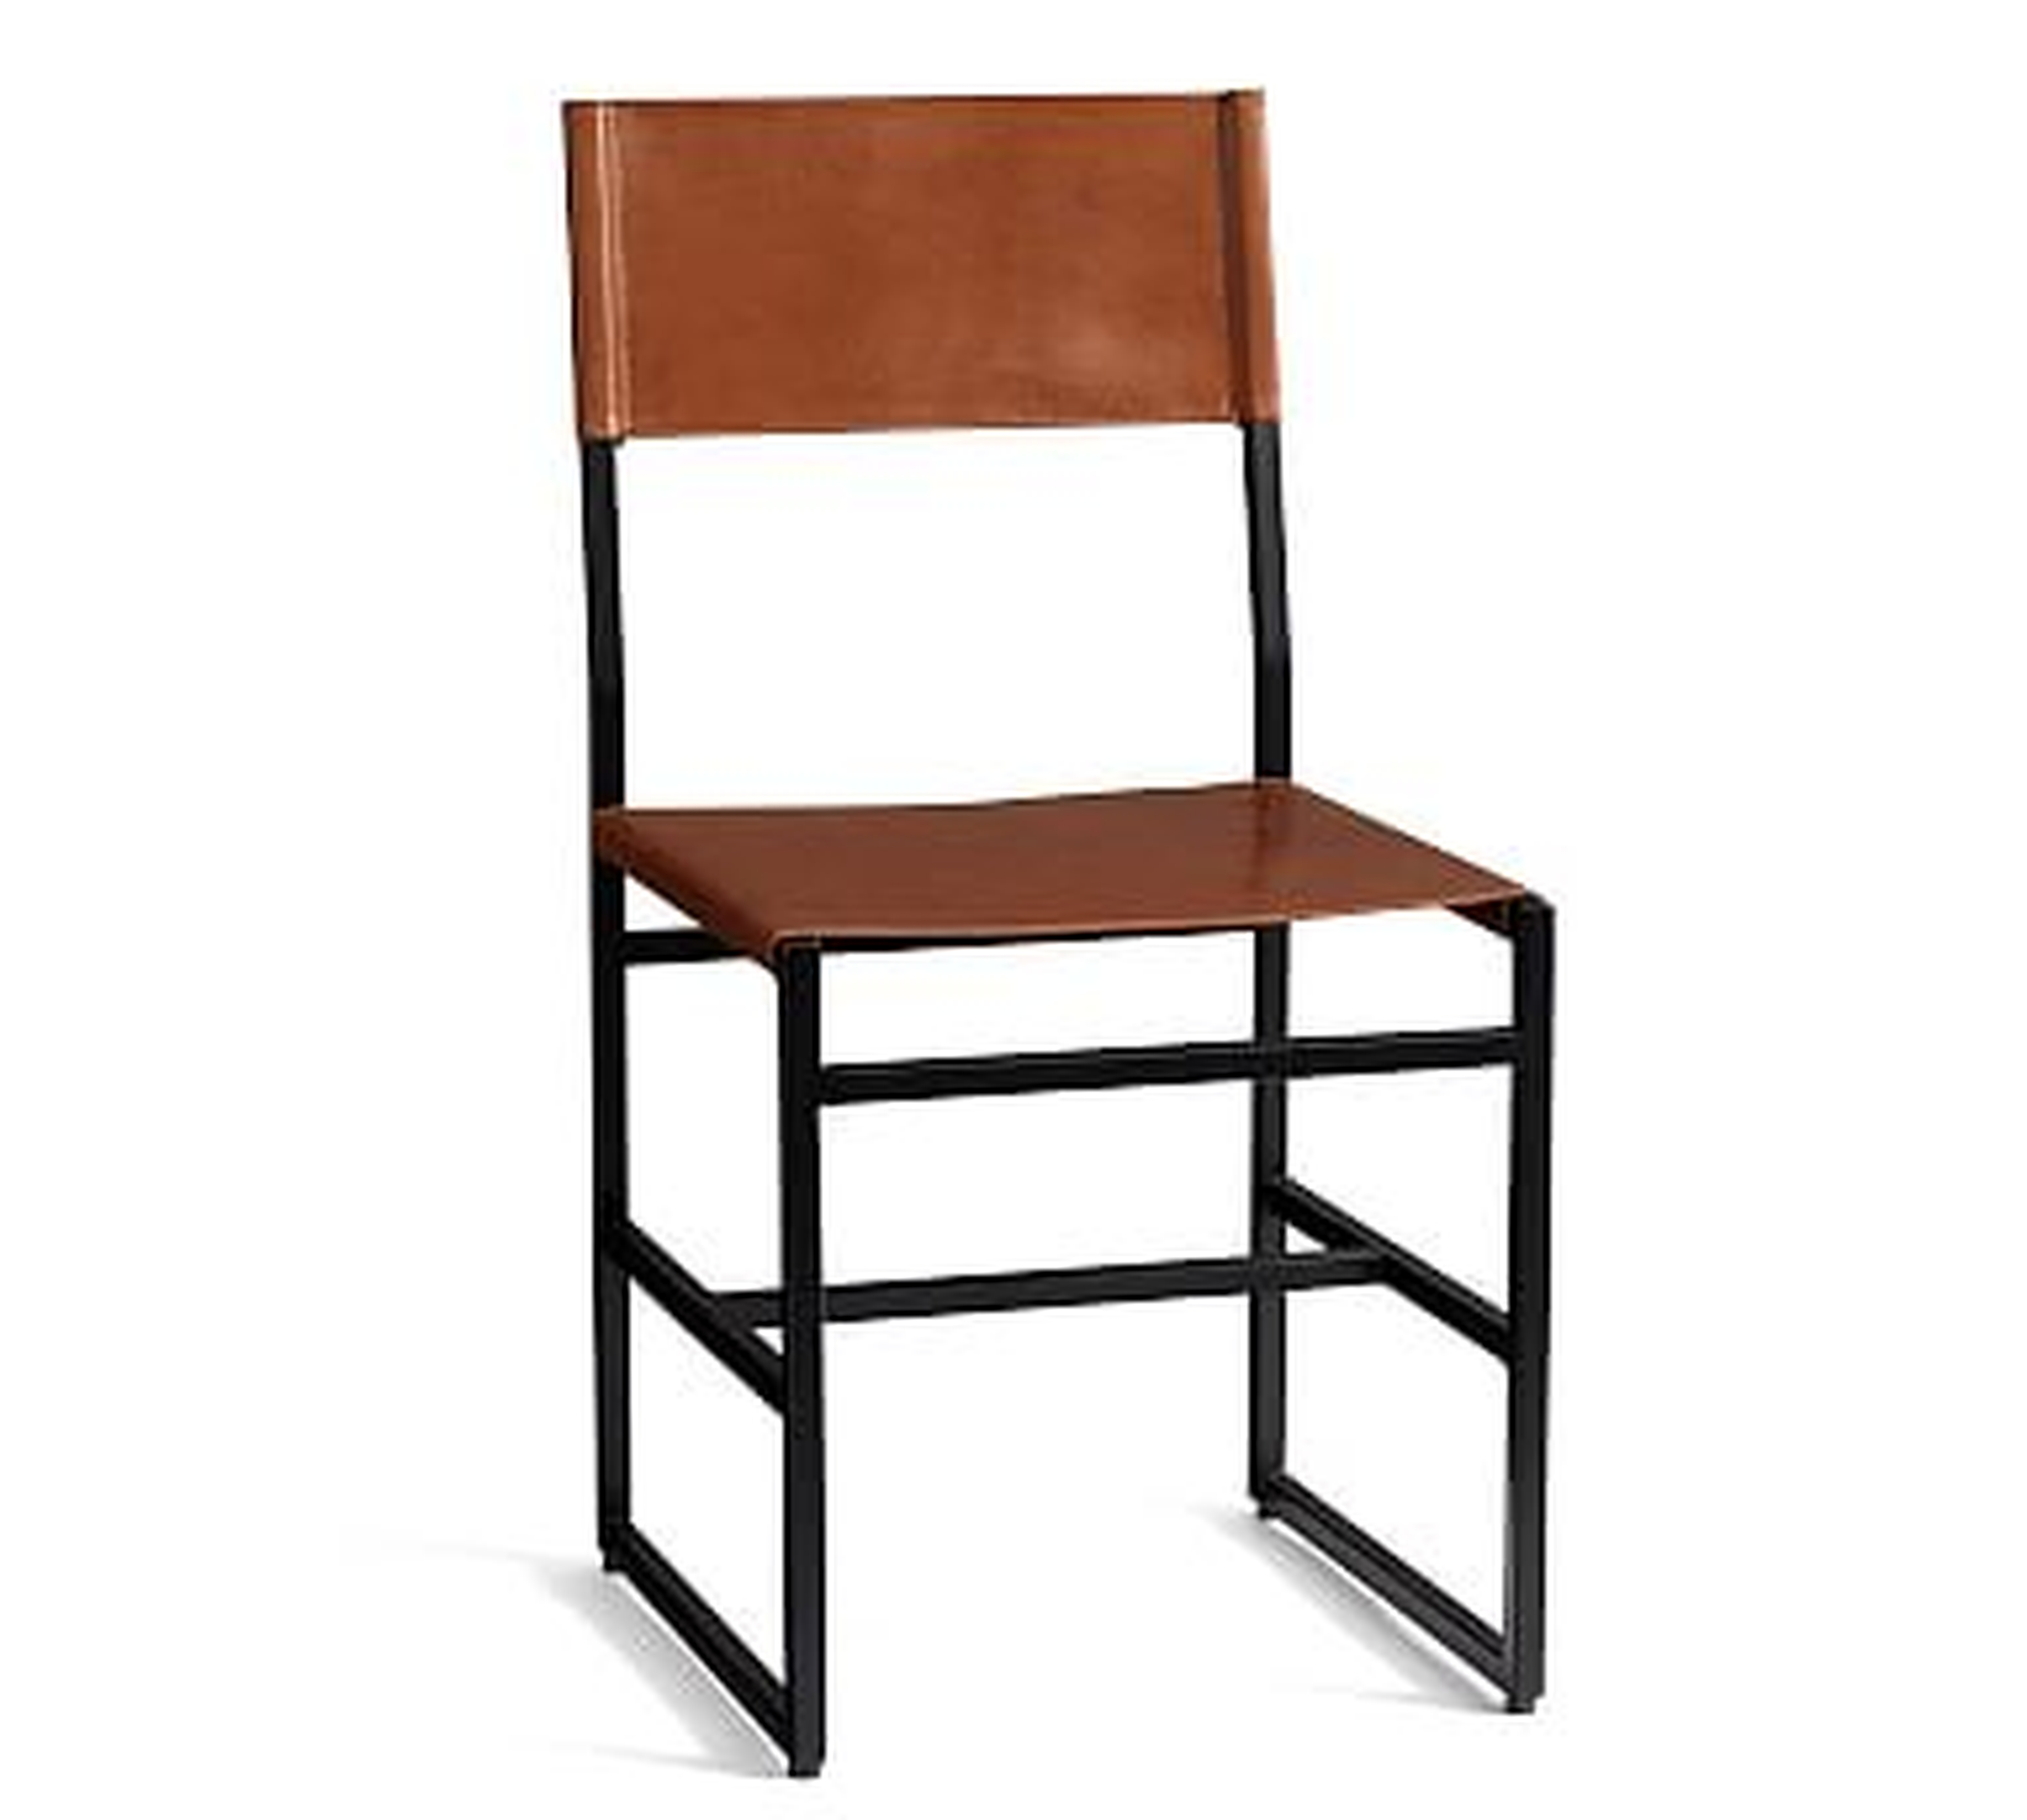 Hardy Leather Dining Chair, Bronze/Saddle Tan Leather - Pottery Barn